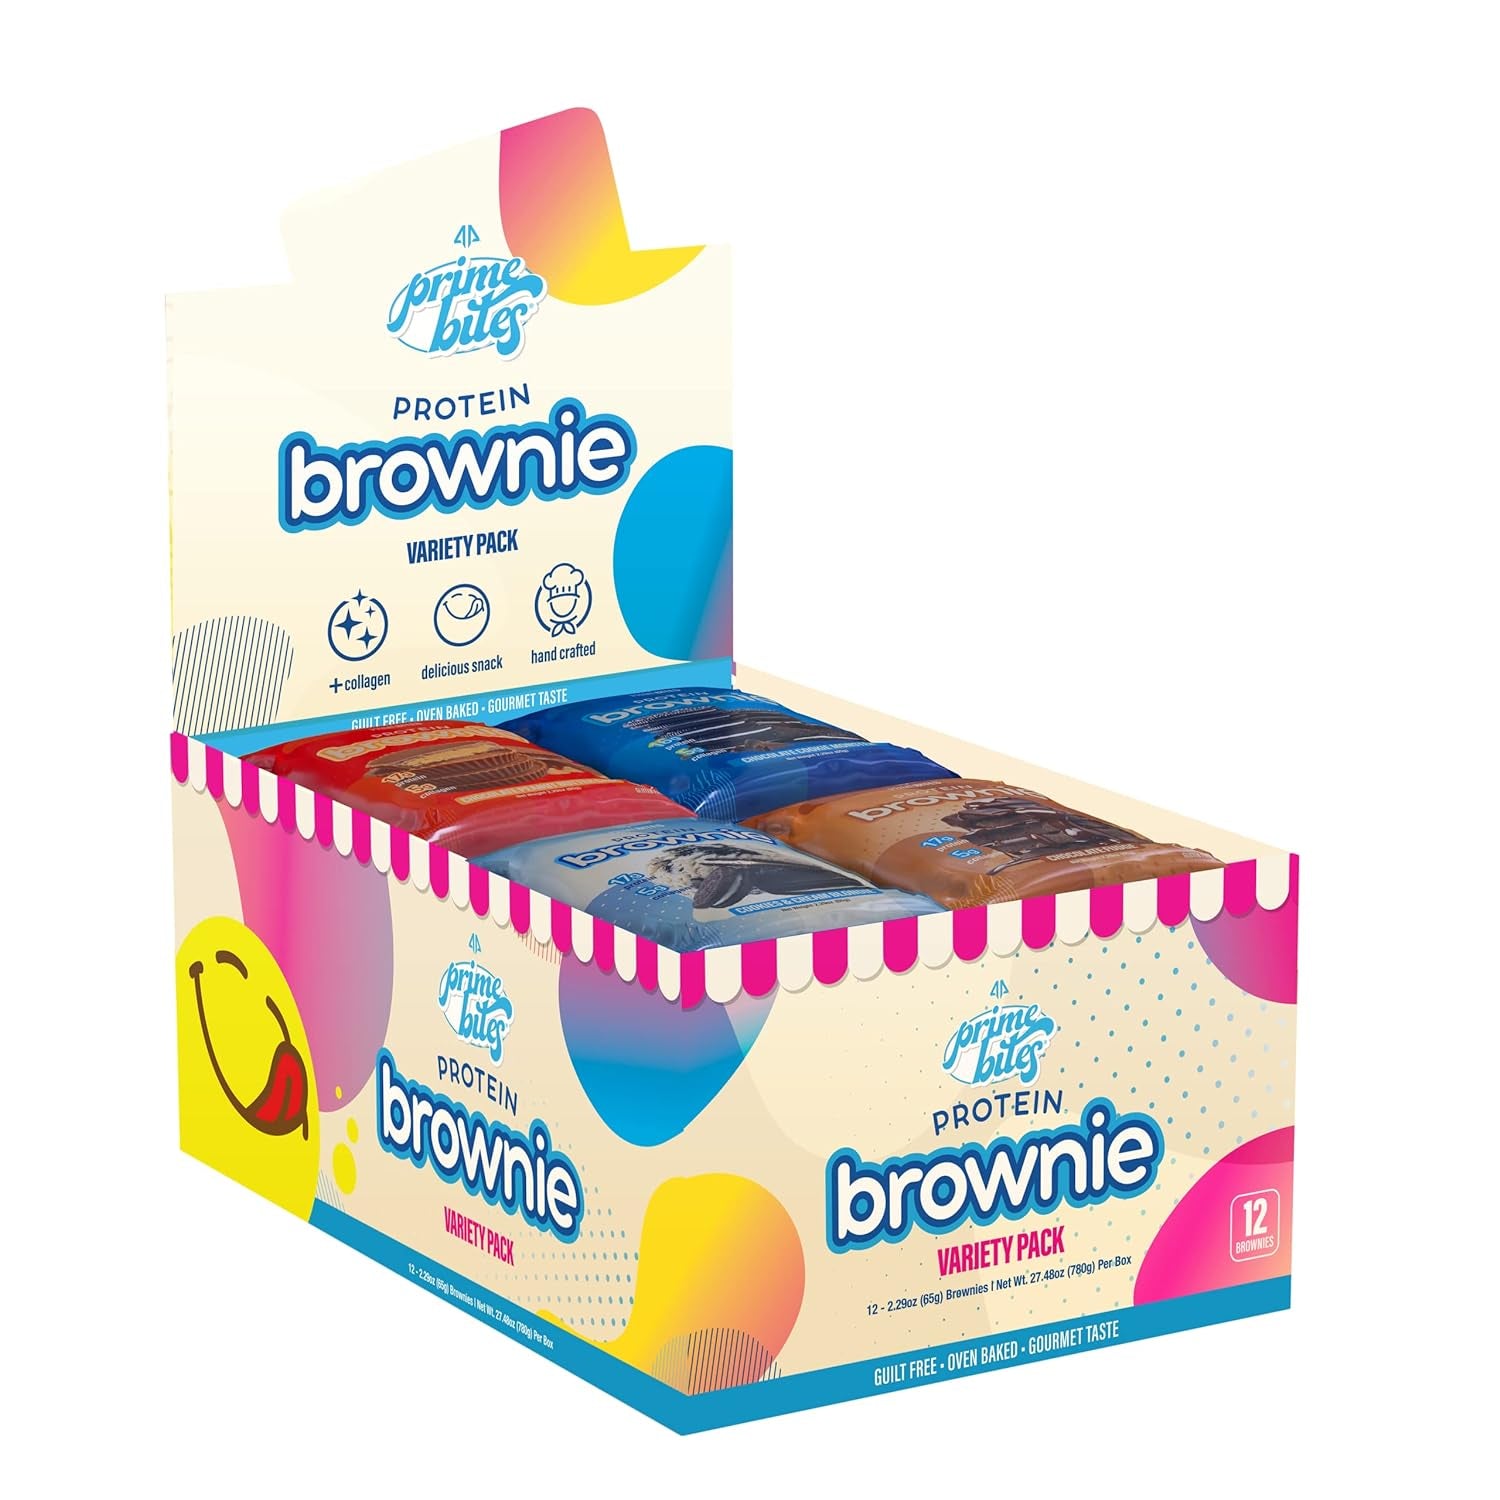 Prime Bites Protein Brownie from Alpha Prime Supplements, 16-17G Protein, 5G Collagen, Delicious Guilt-Free Snack,12 Bars per Box (Variety Pack)